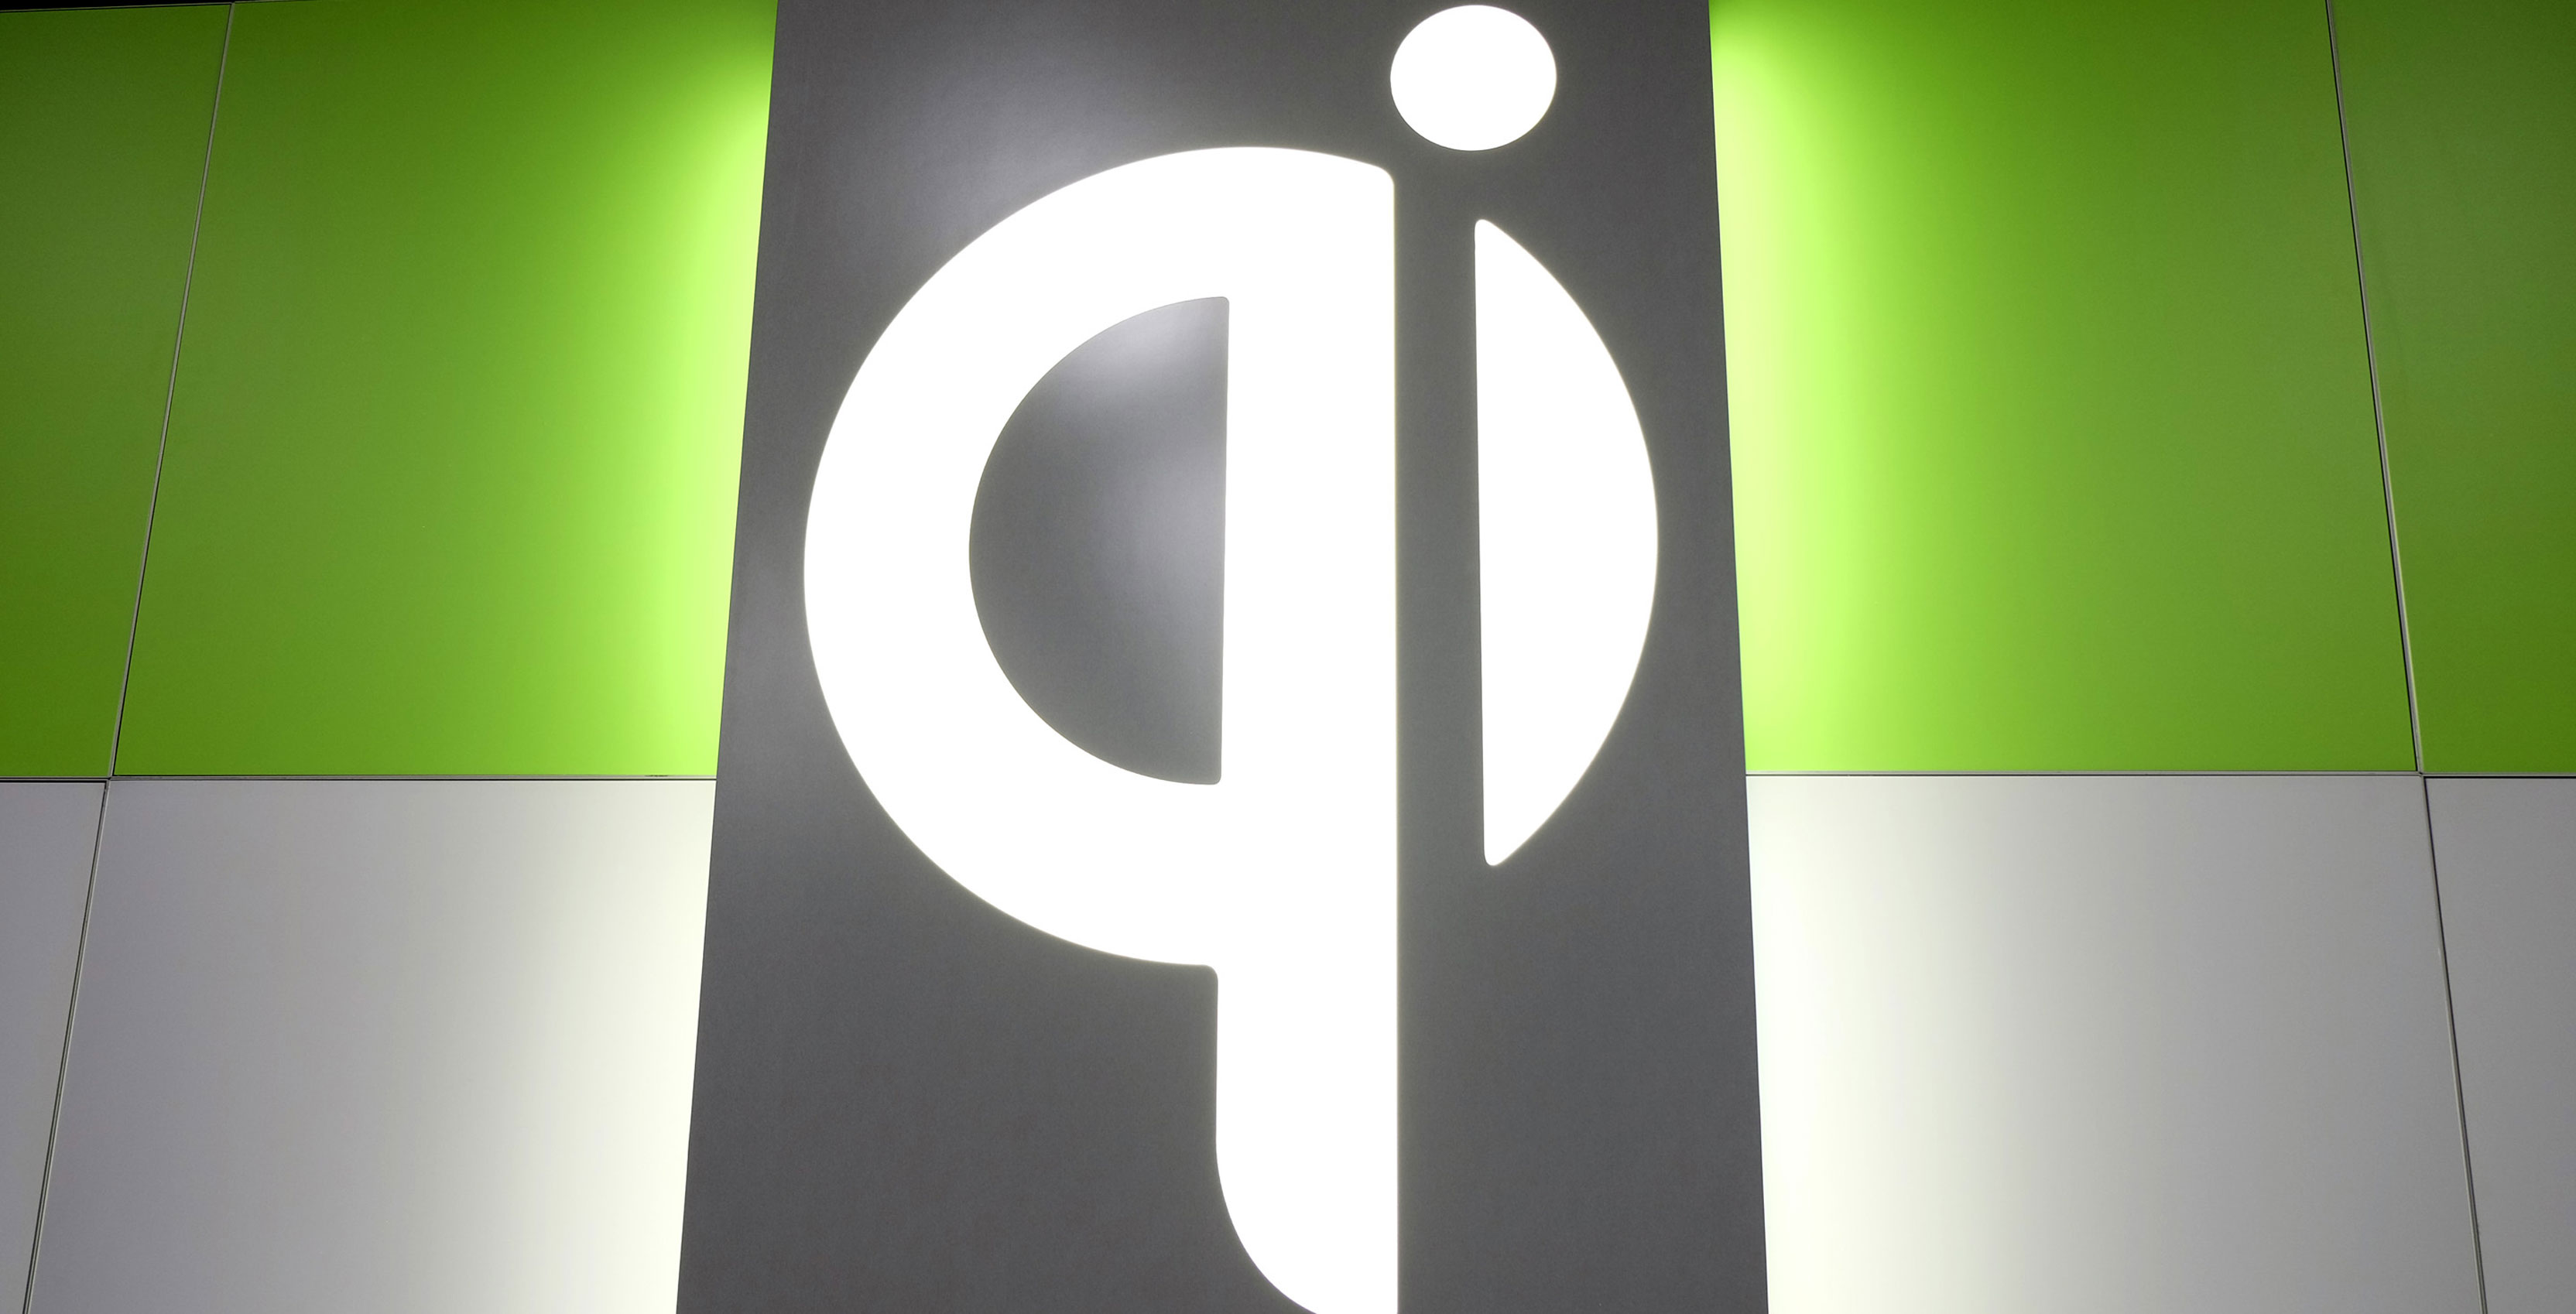 QI logo on wall at CES 2018